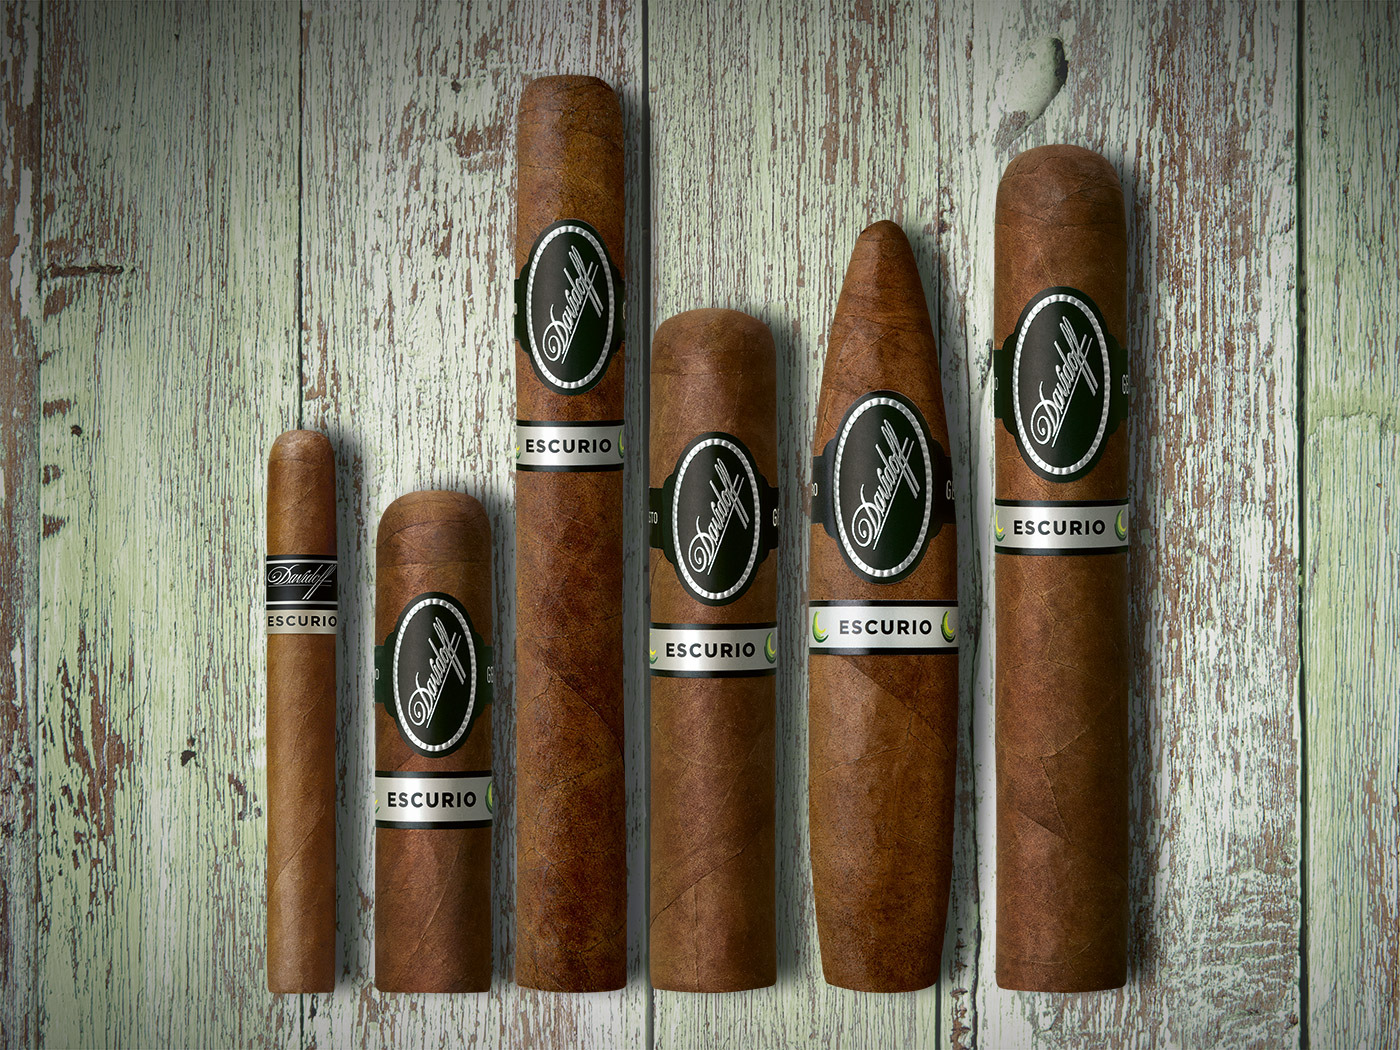 Line-up of the Davidoff Escurio line with all formats.